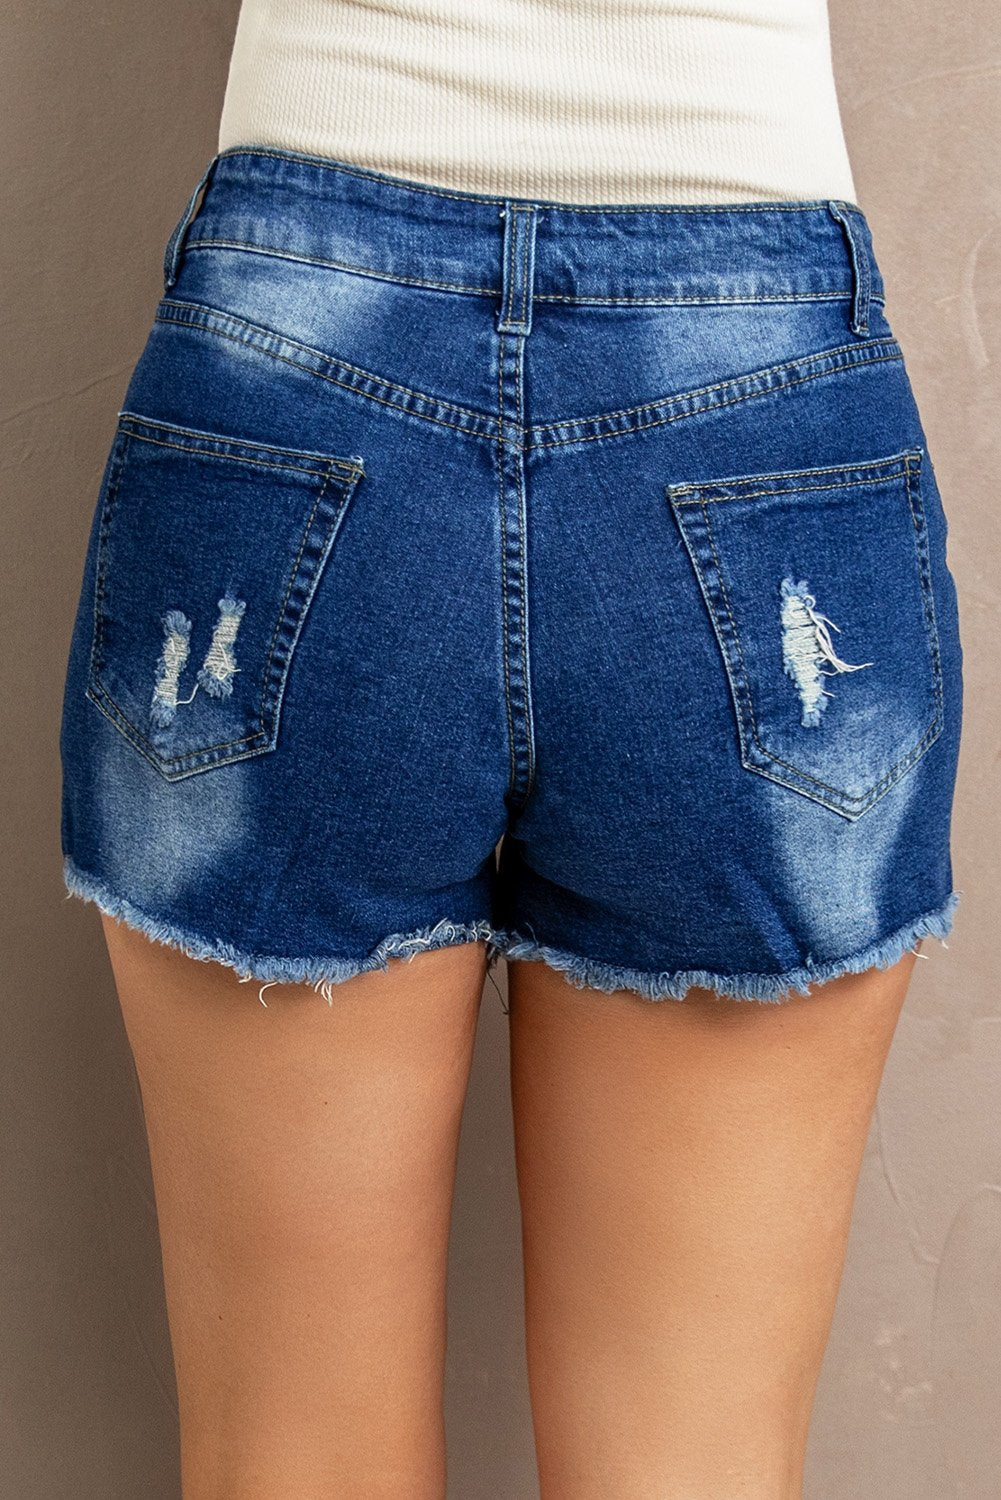 Lace Distressed Jean Shorts